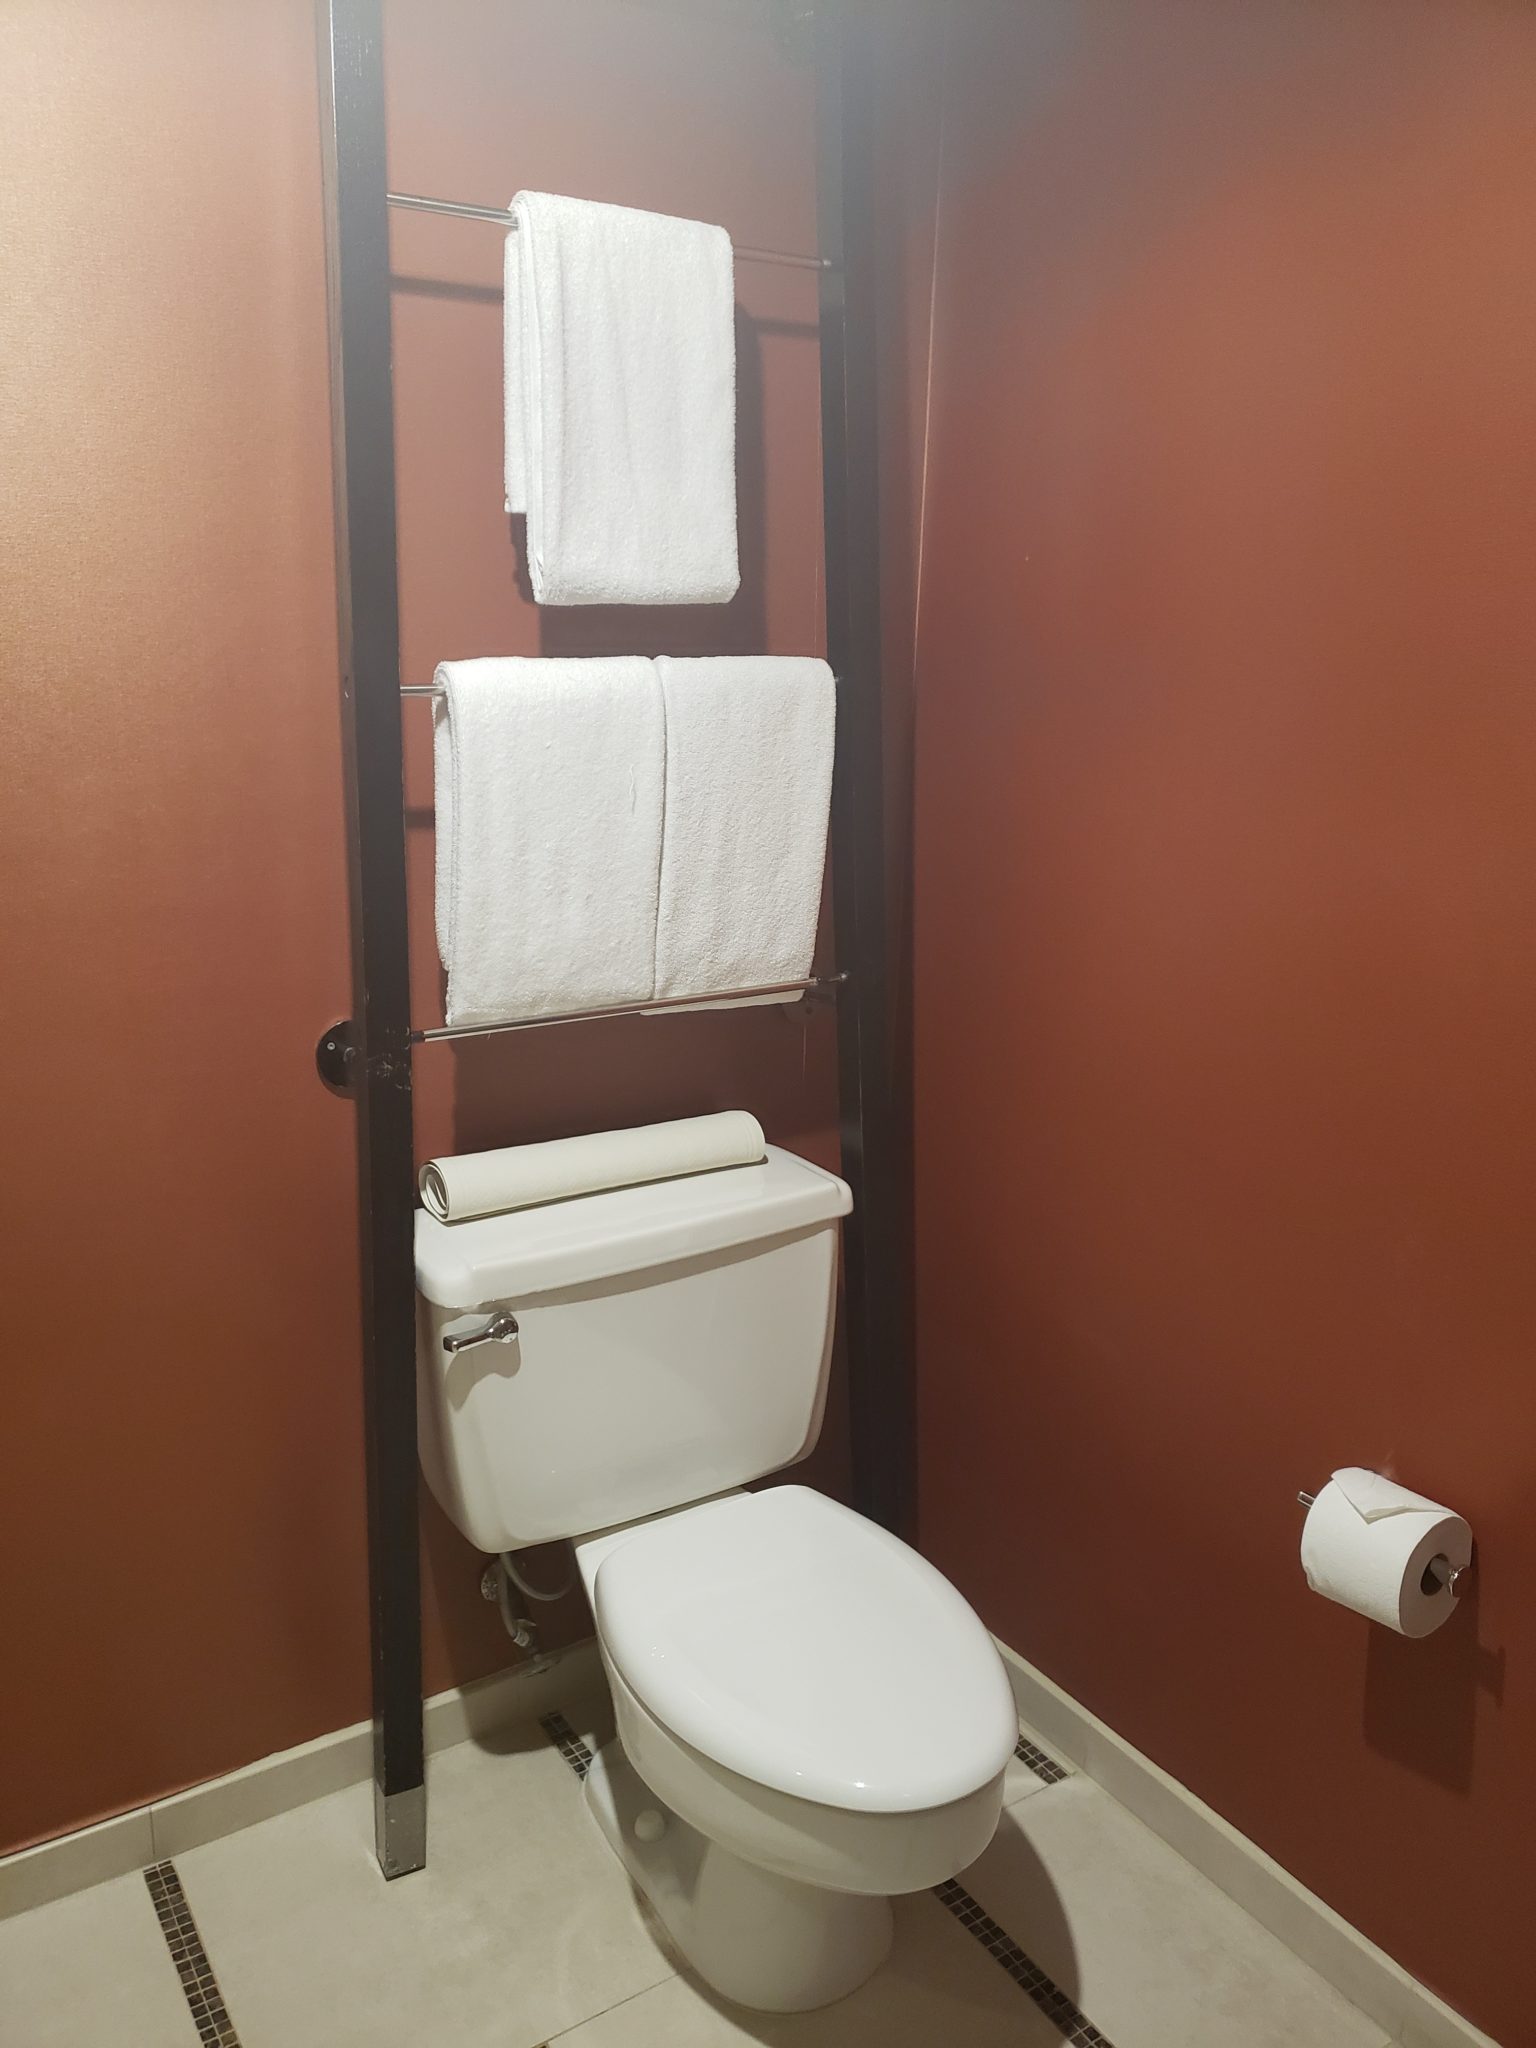 a toilet and towel rack in a bathroom